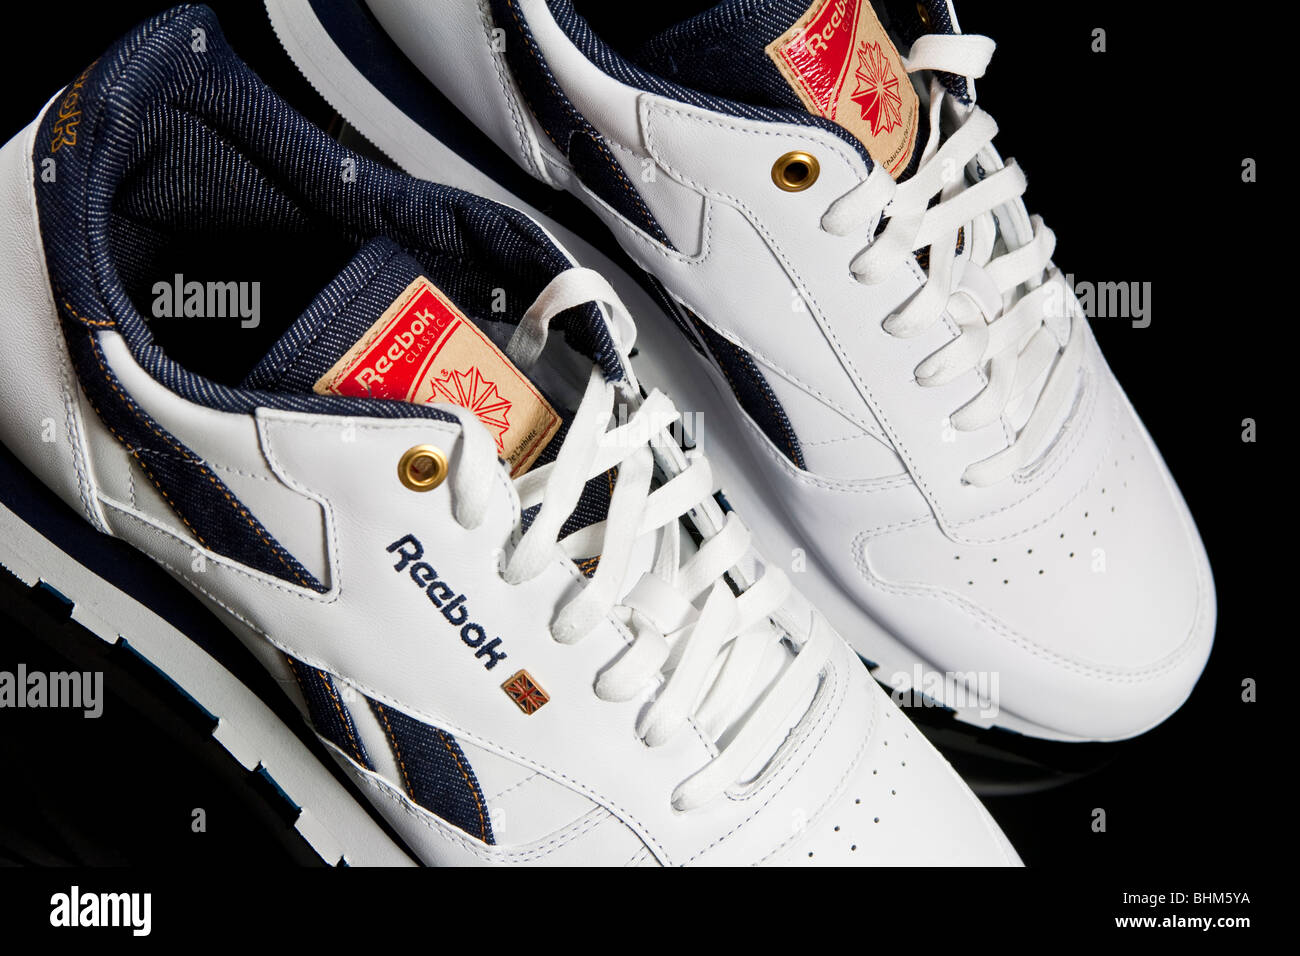 new reebok shoes collection